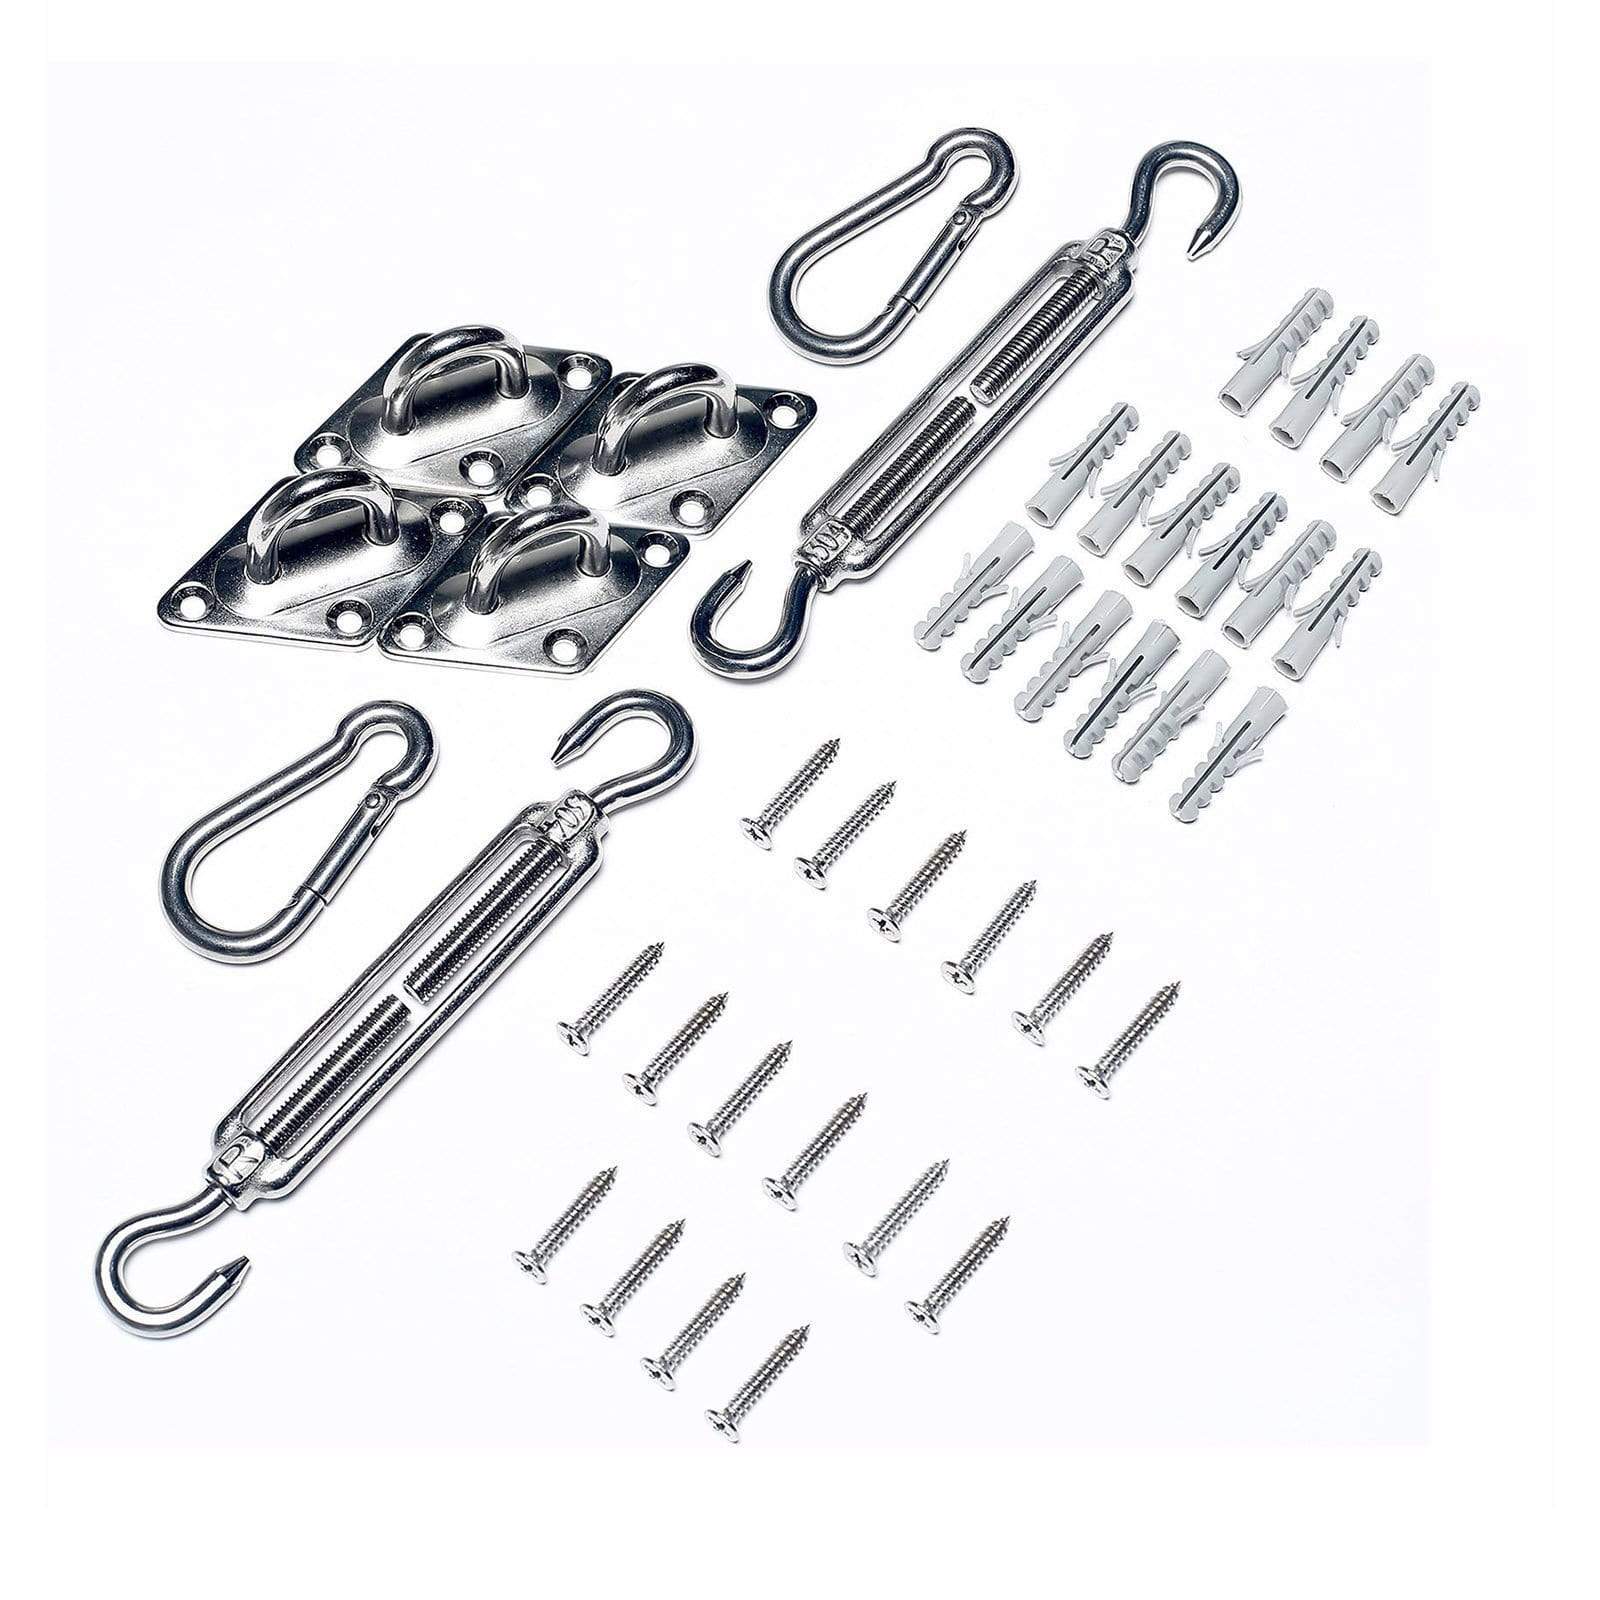 Silver Stainless Steel Sun Shade Sail Installation Tools Kit